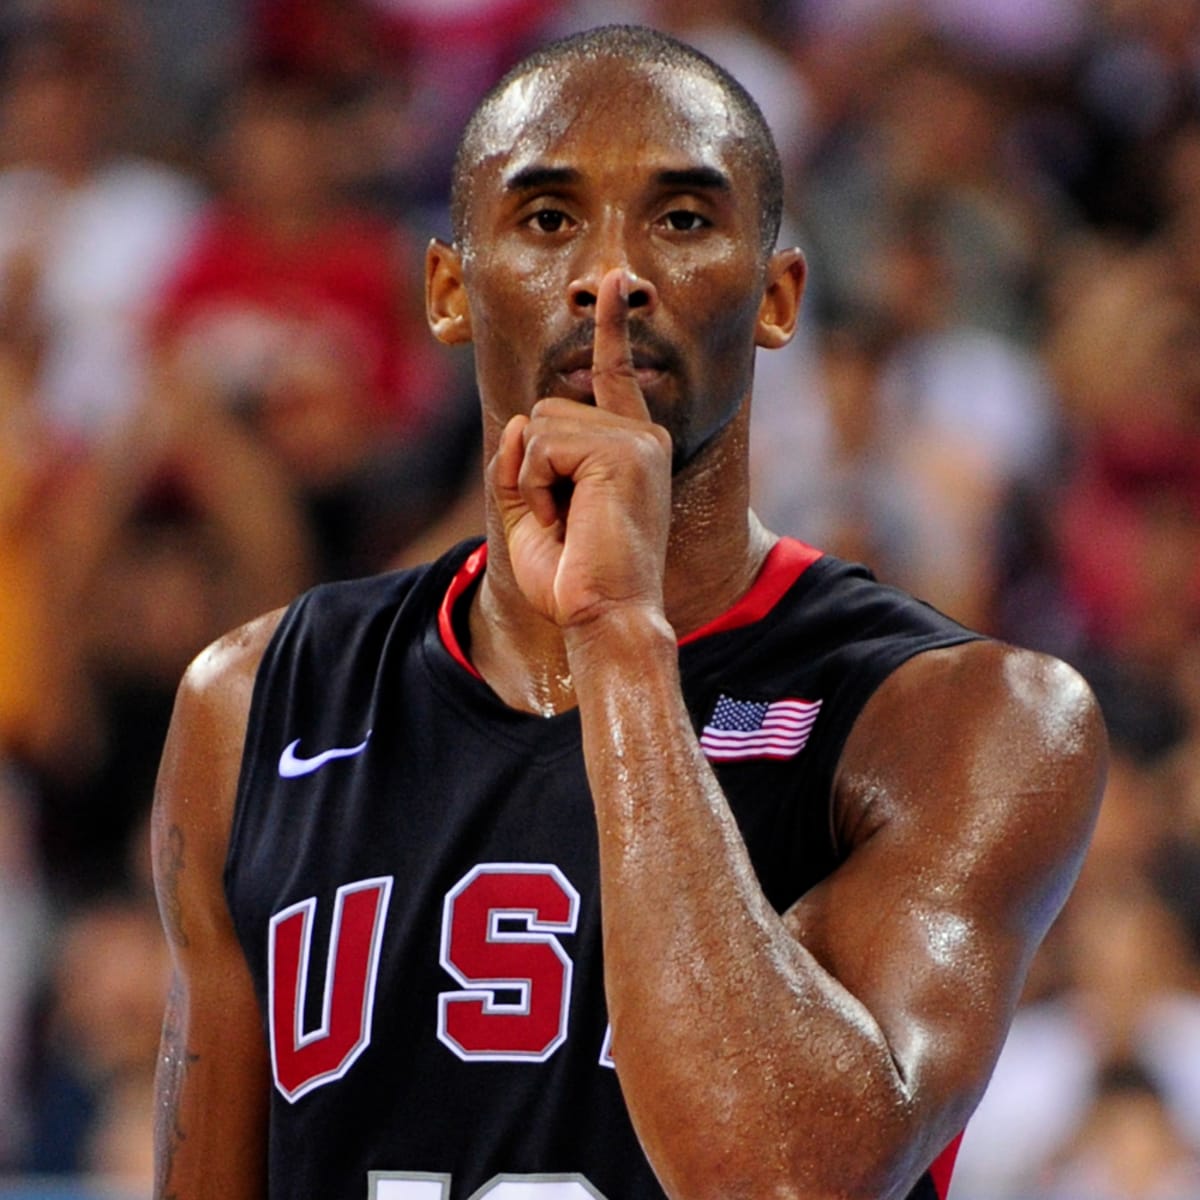 NBA players who never lost with Team USA